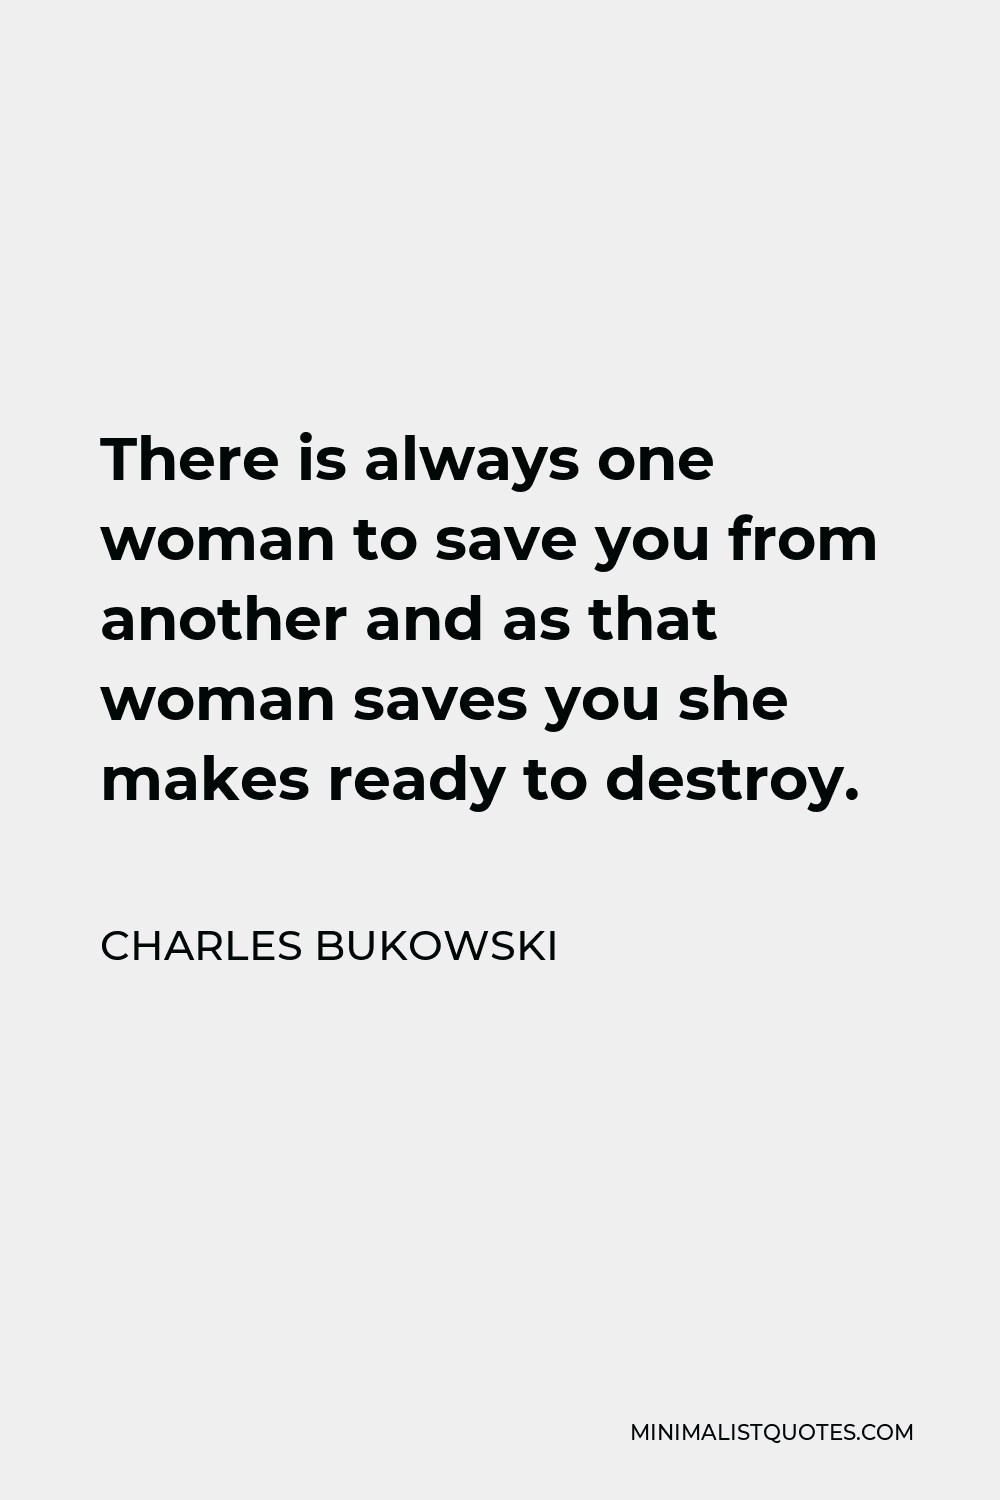 Charles Bukowski Quote - There is always one woman to save you from another and as that woman saves you she makes ready to destroy.